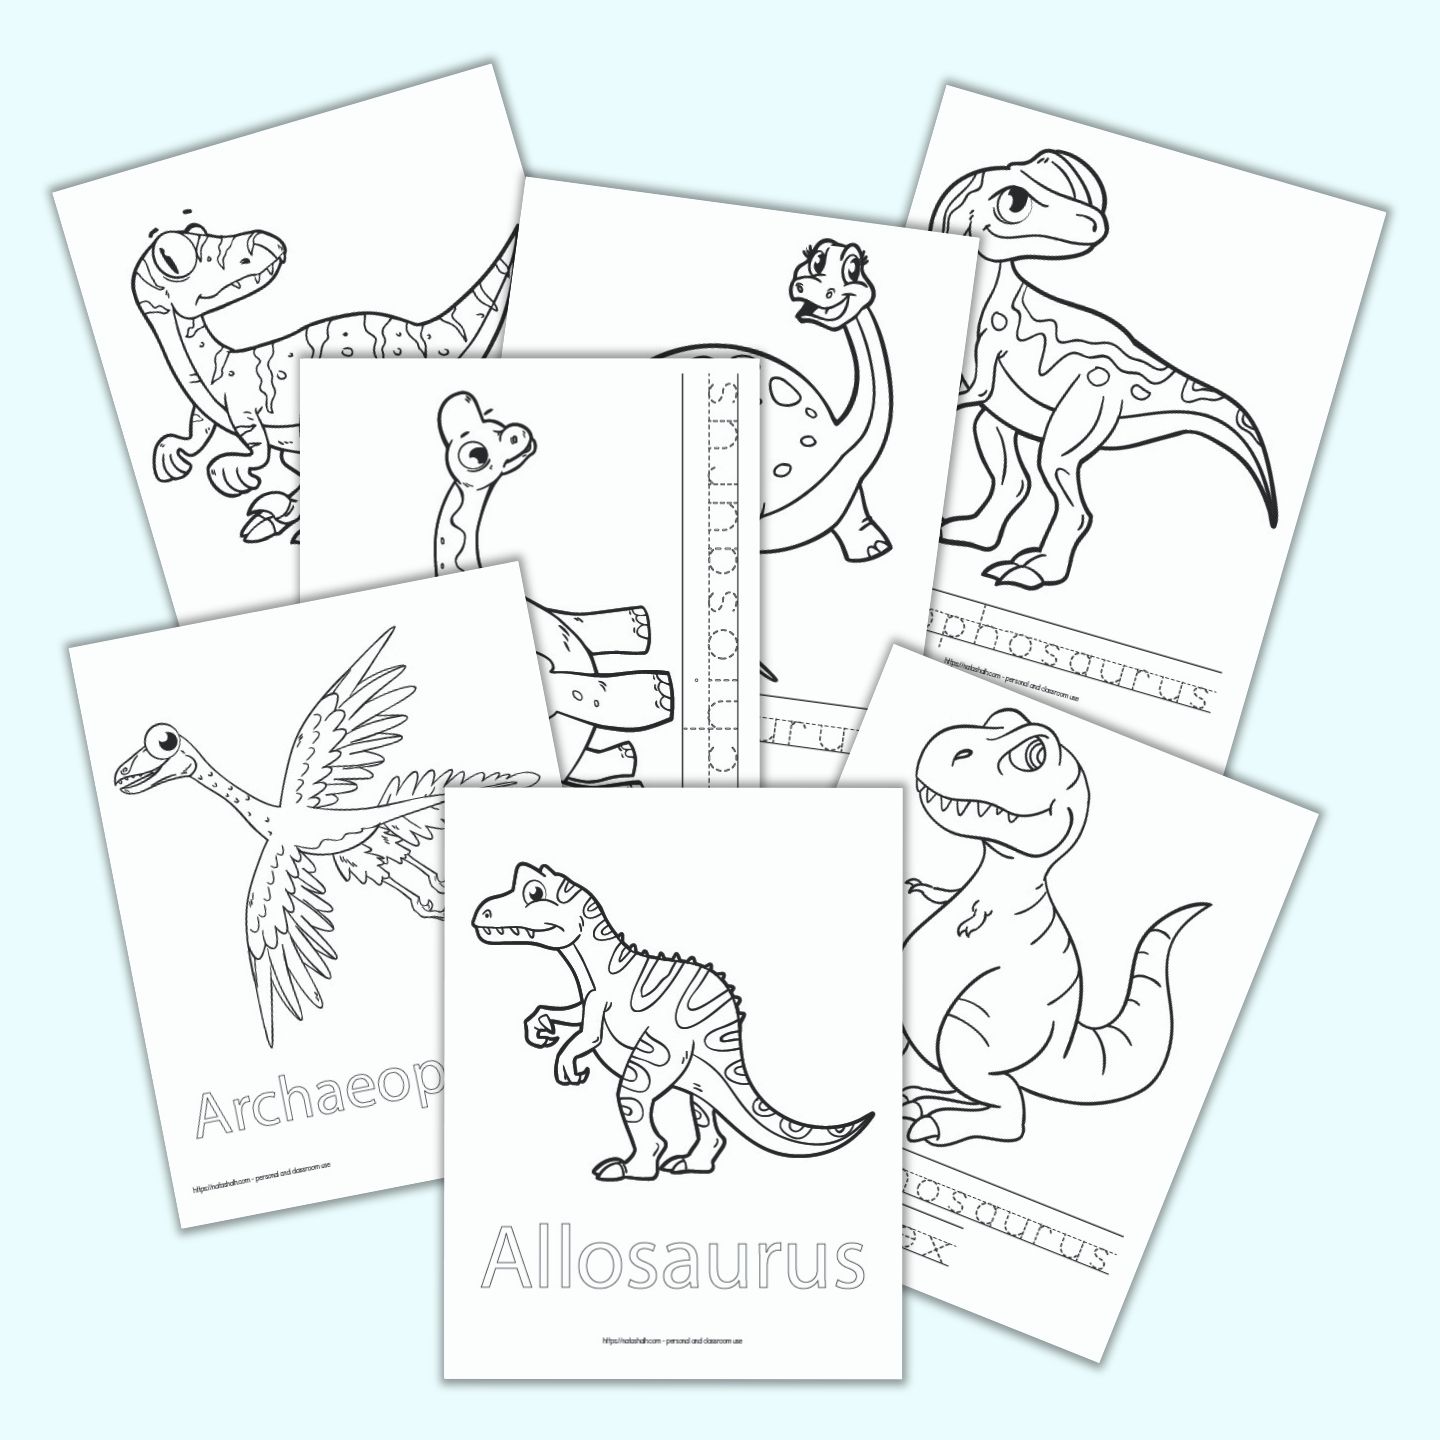 Free Printable Dinosaur Coloring Pages with Names   The Artisan Life